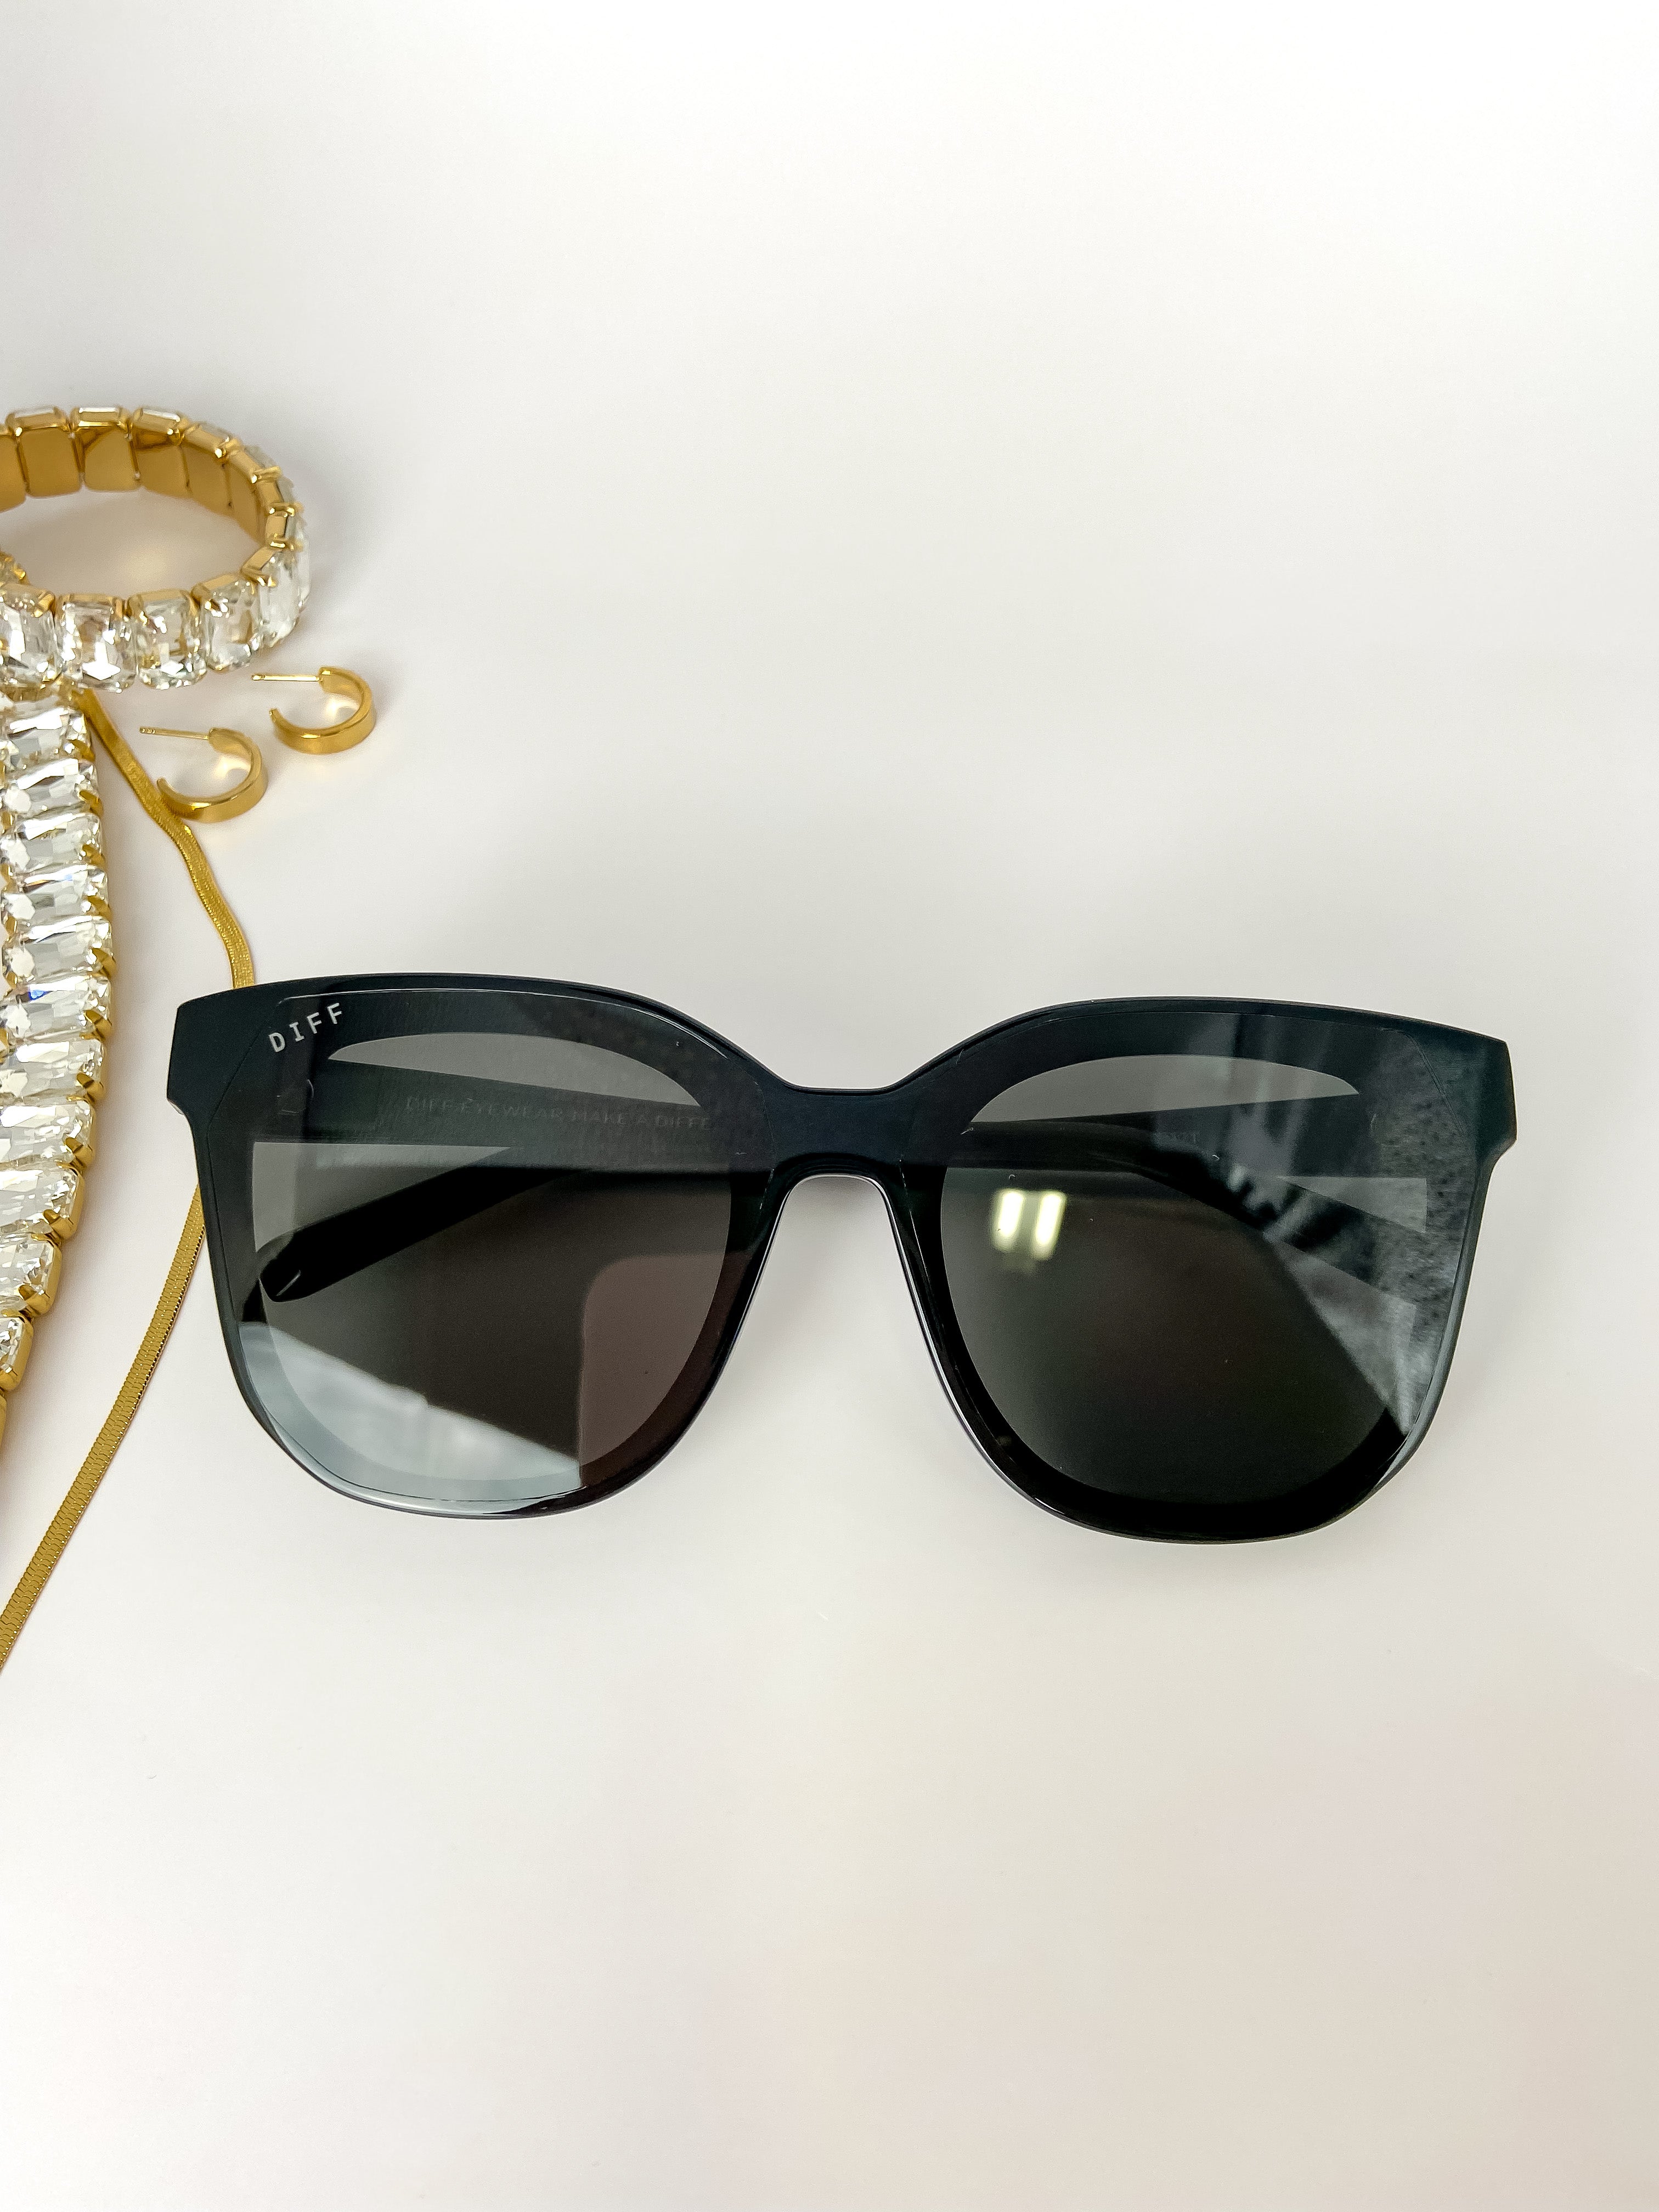 DIFF | Gia Black Lens Sunglasses in Black - Giddy Up Glamour Boutique